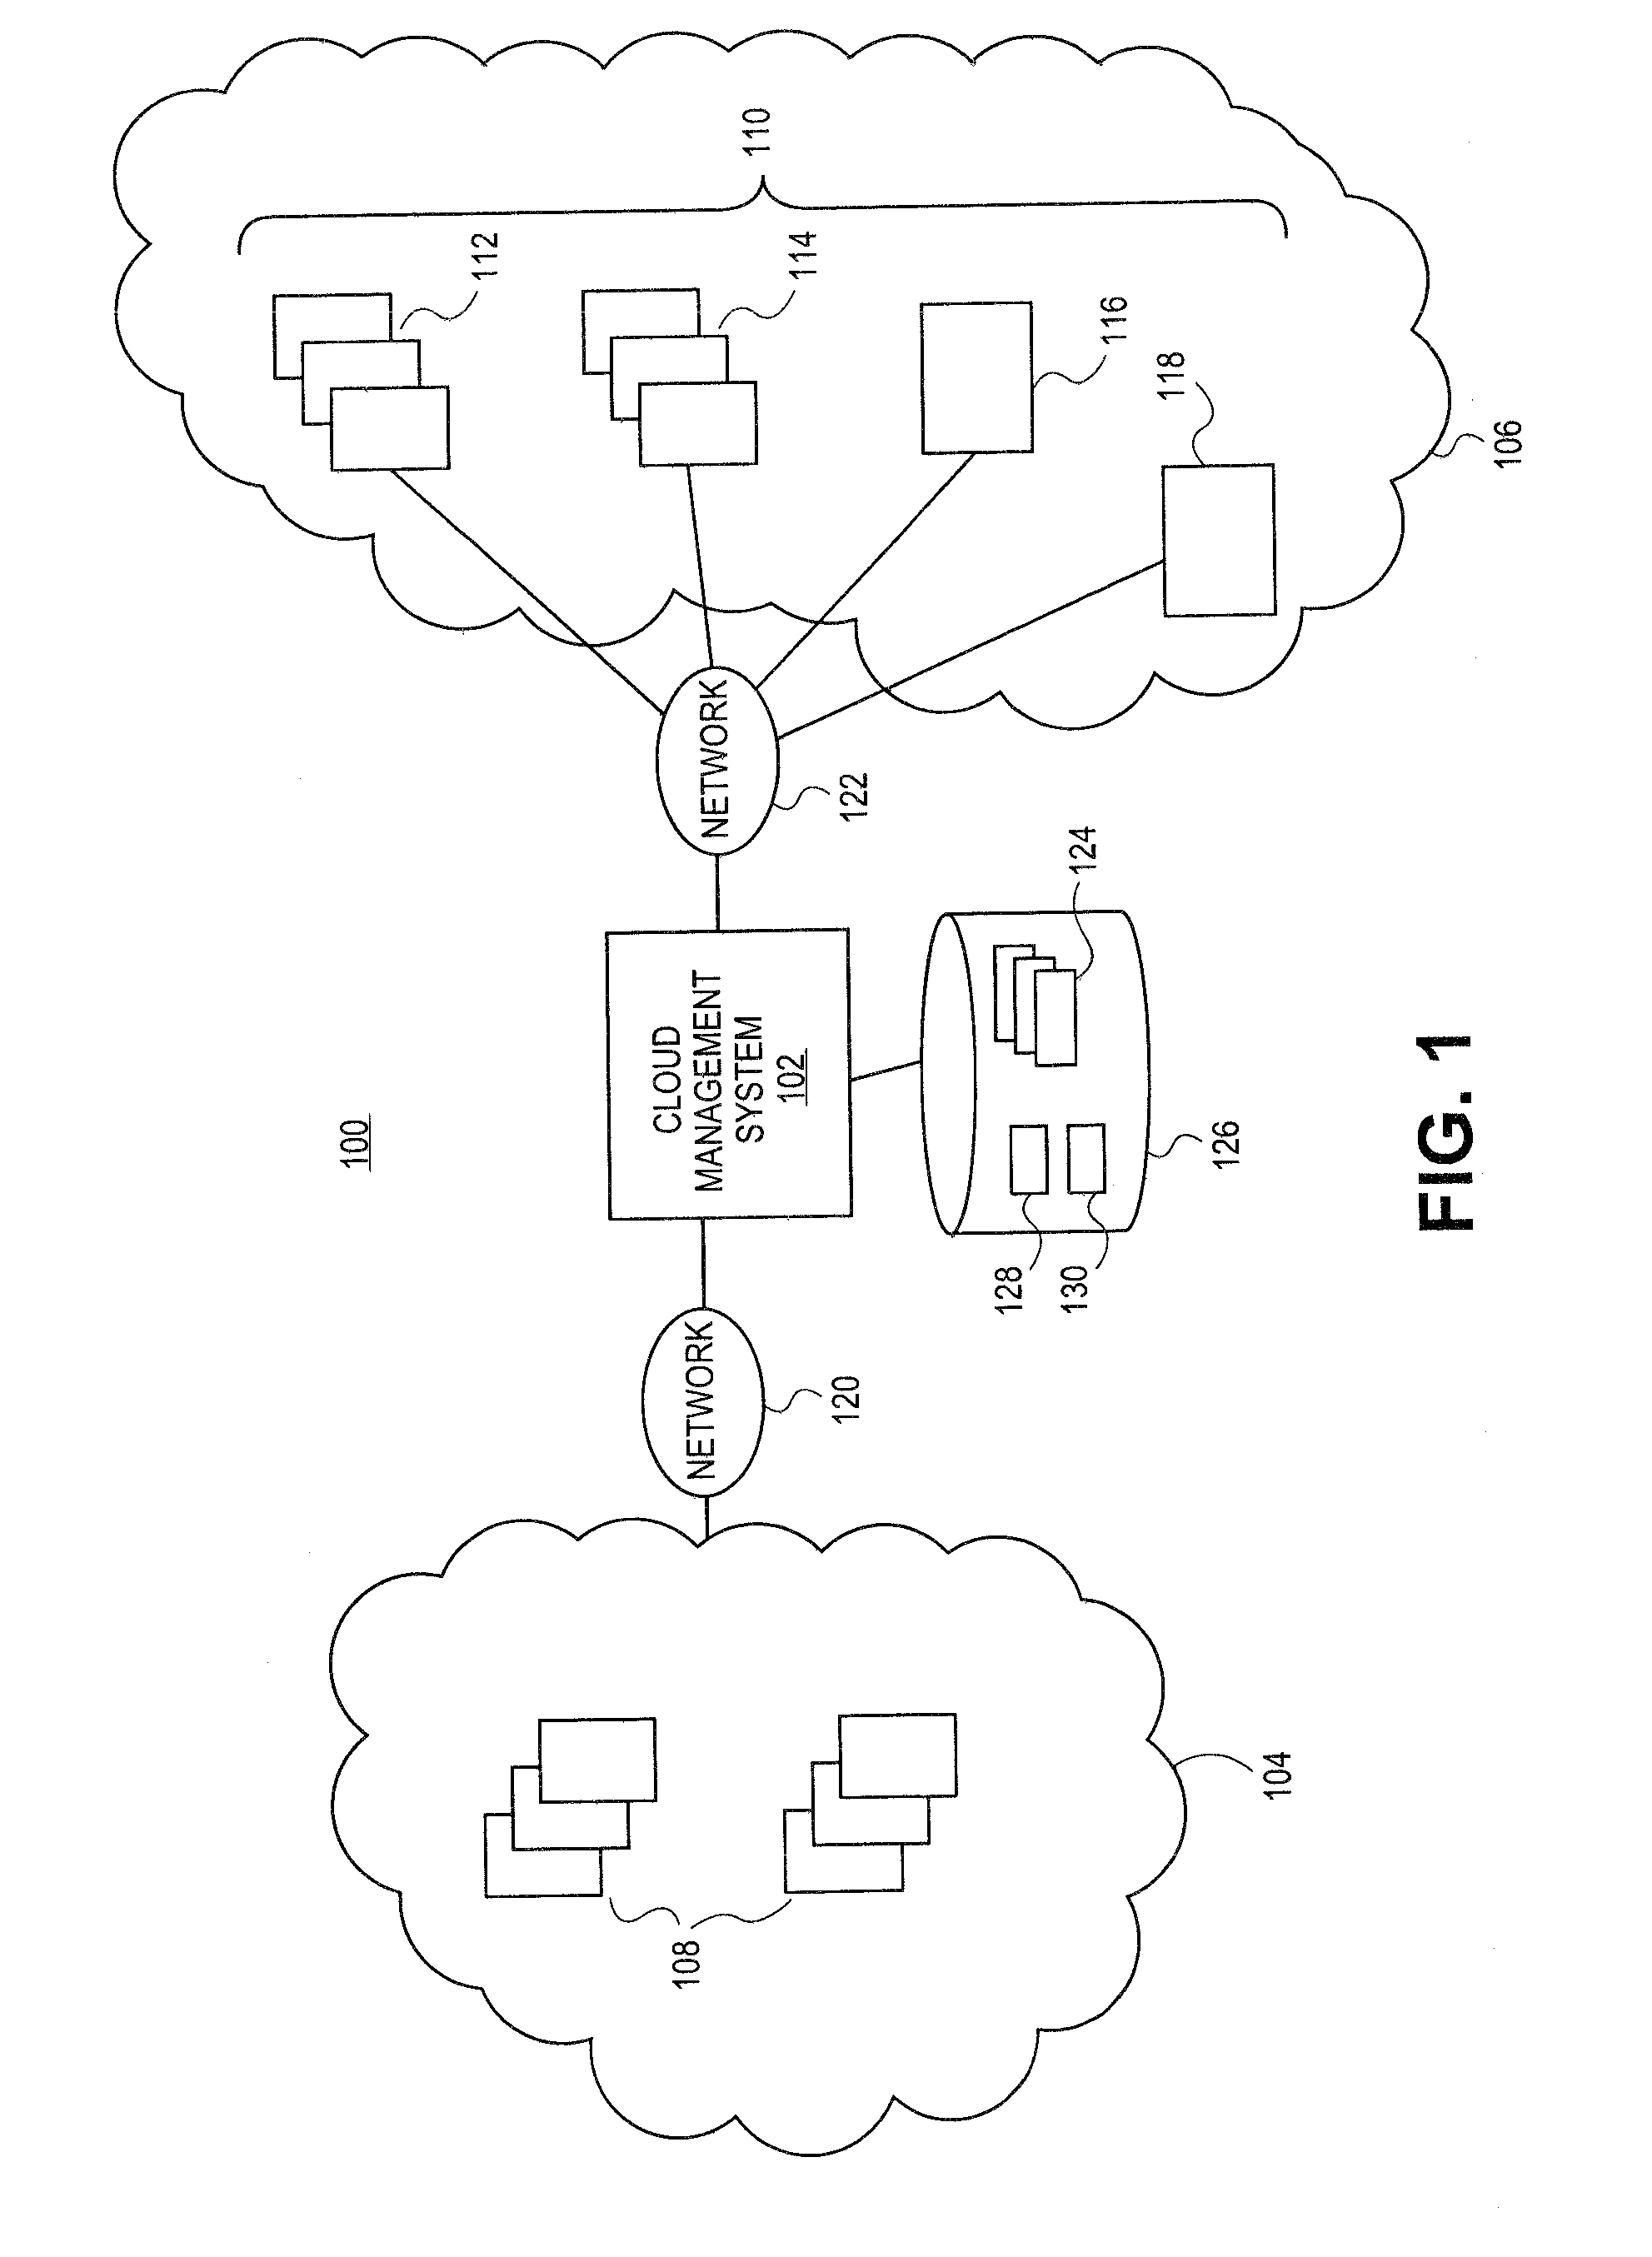 Methods and systems for abstracting cloud management to allow communication between independently controlled clouds